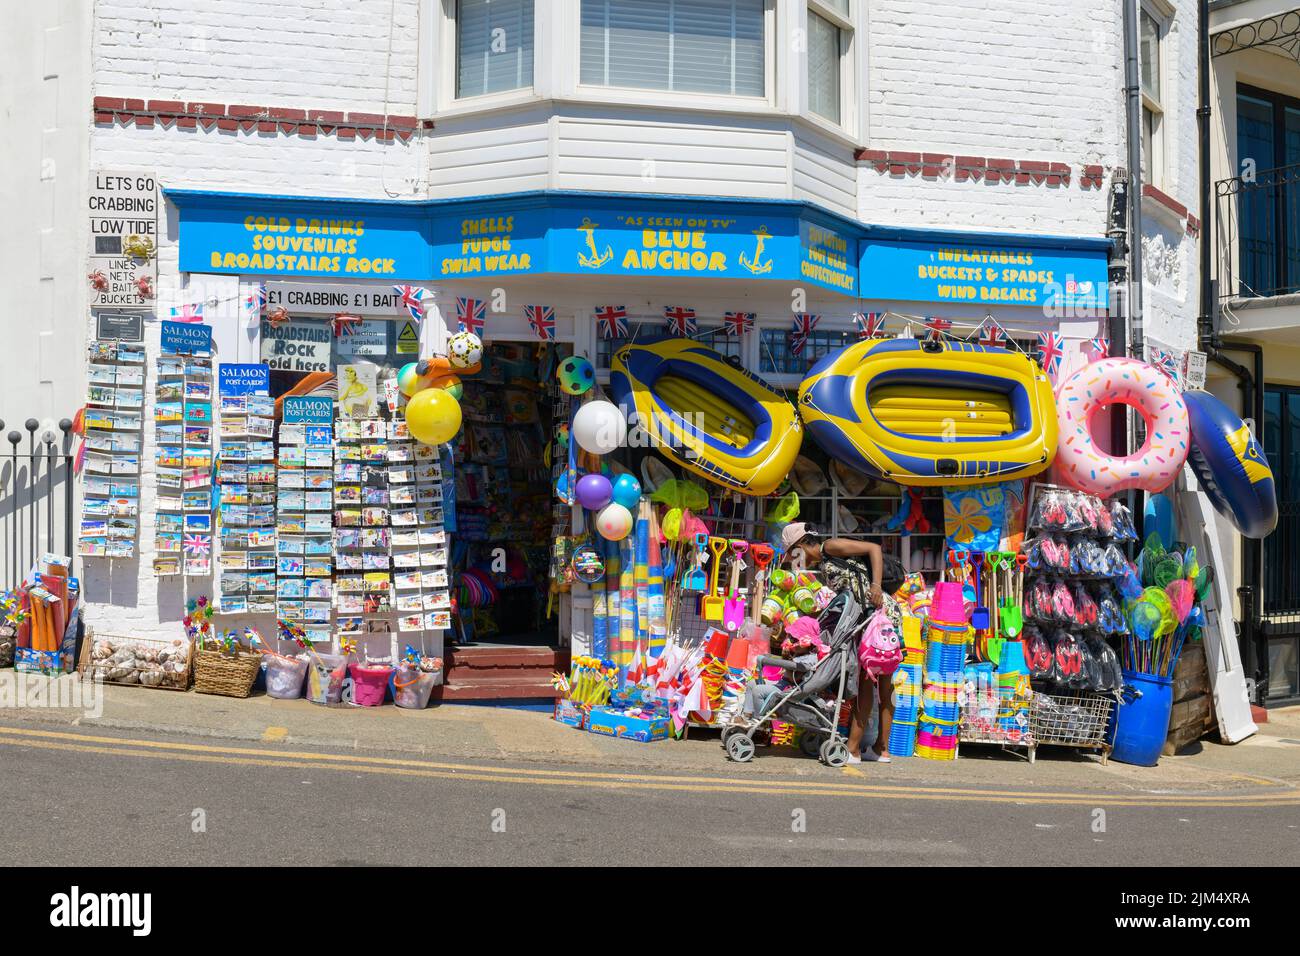 Traditional british seaside shop selling postcards, buckets and spades, inflatables and wind breaks - Blue Anchor, Broadstairs, Kent, England, UK Stock Photo